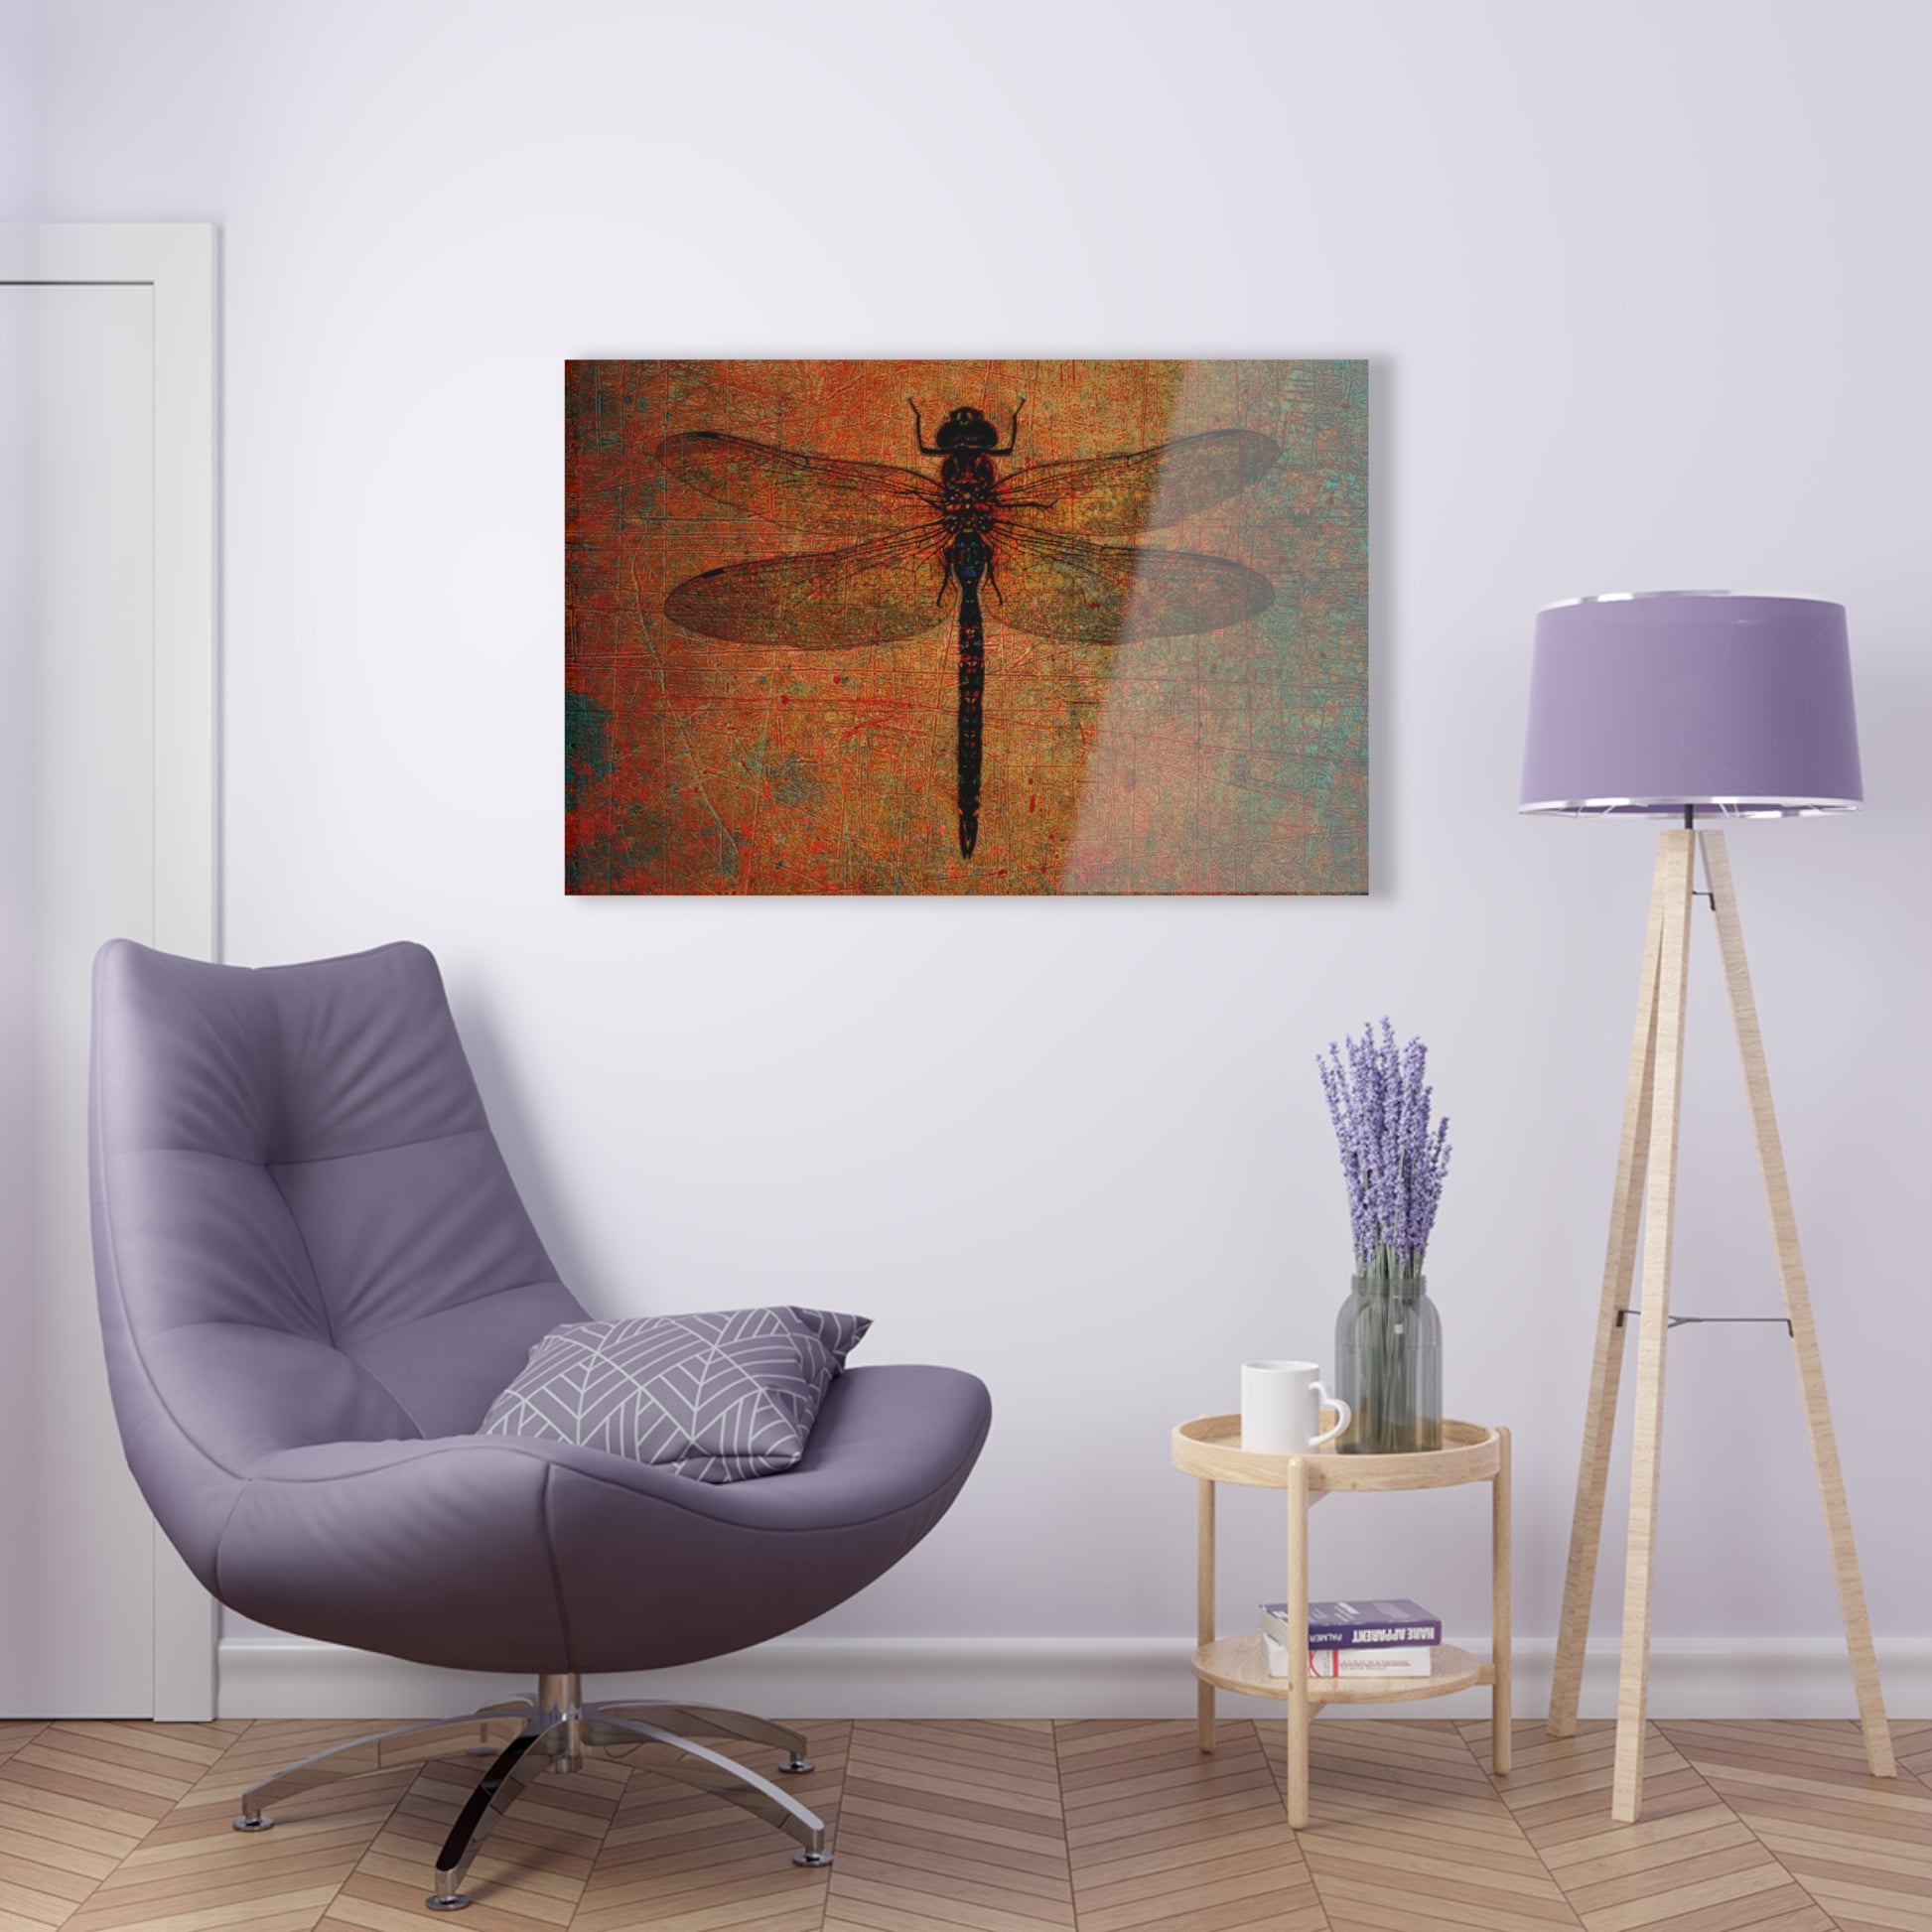 Dragonfly on Distressed Brown Stone Background on a Crystal Clear Acrylic Panel 36x24 hung on light wall